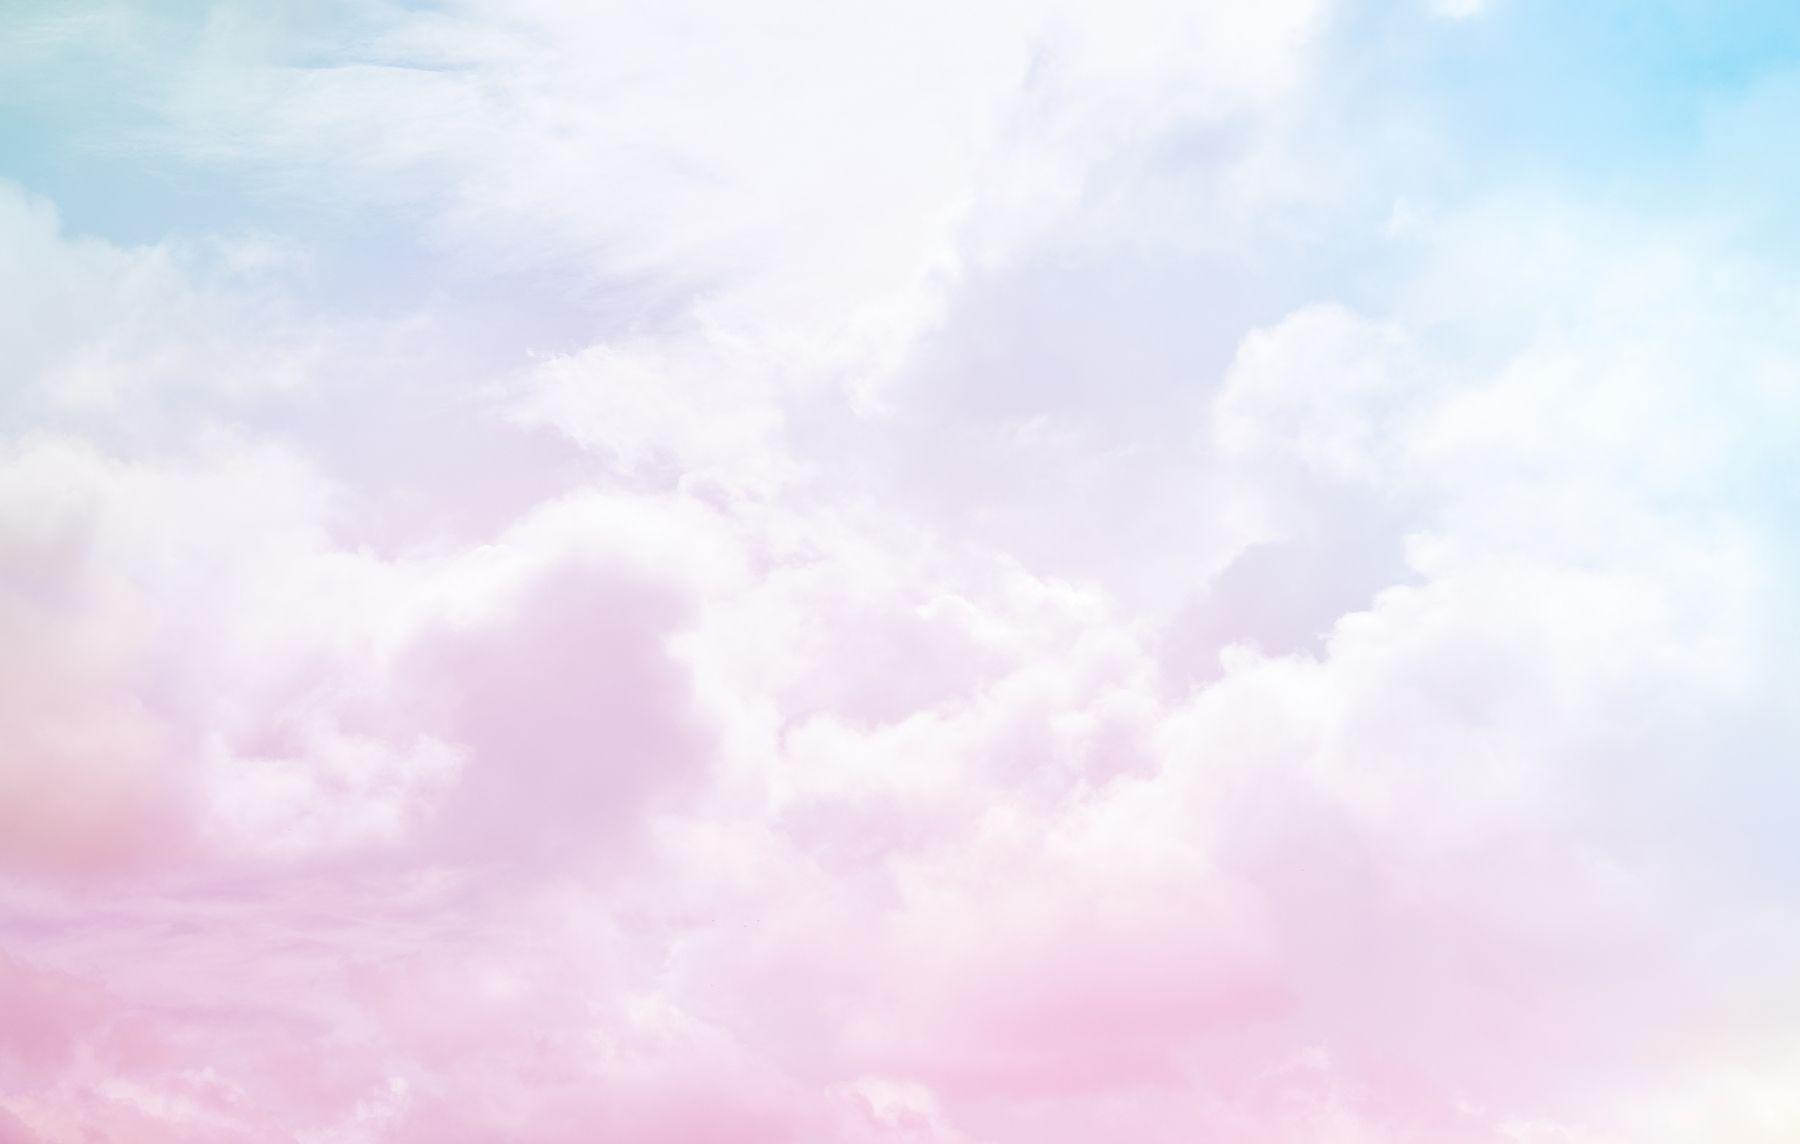 Dreamy Clouds Wallpapers - Top Free Dreamy Clouds Backgrounds ...